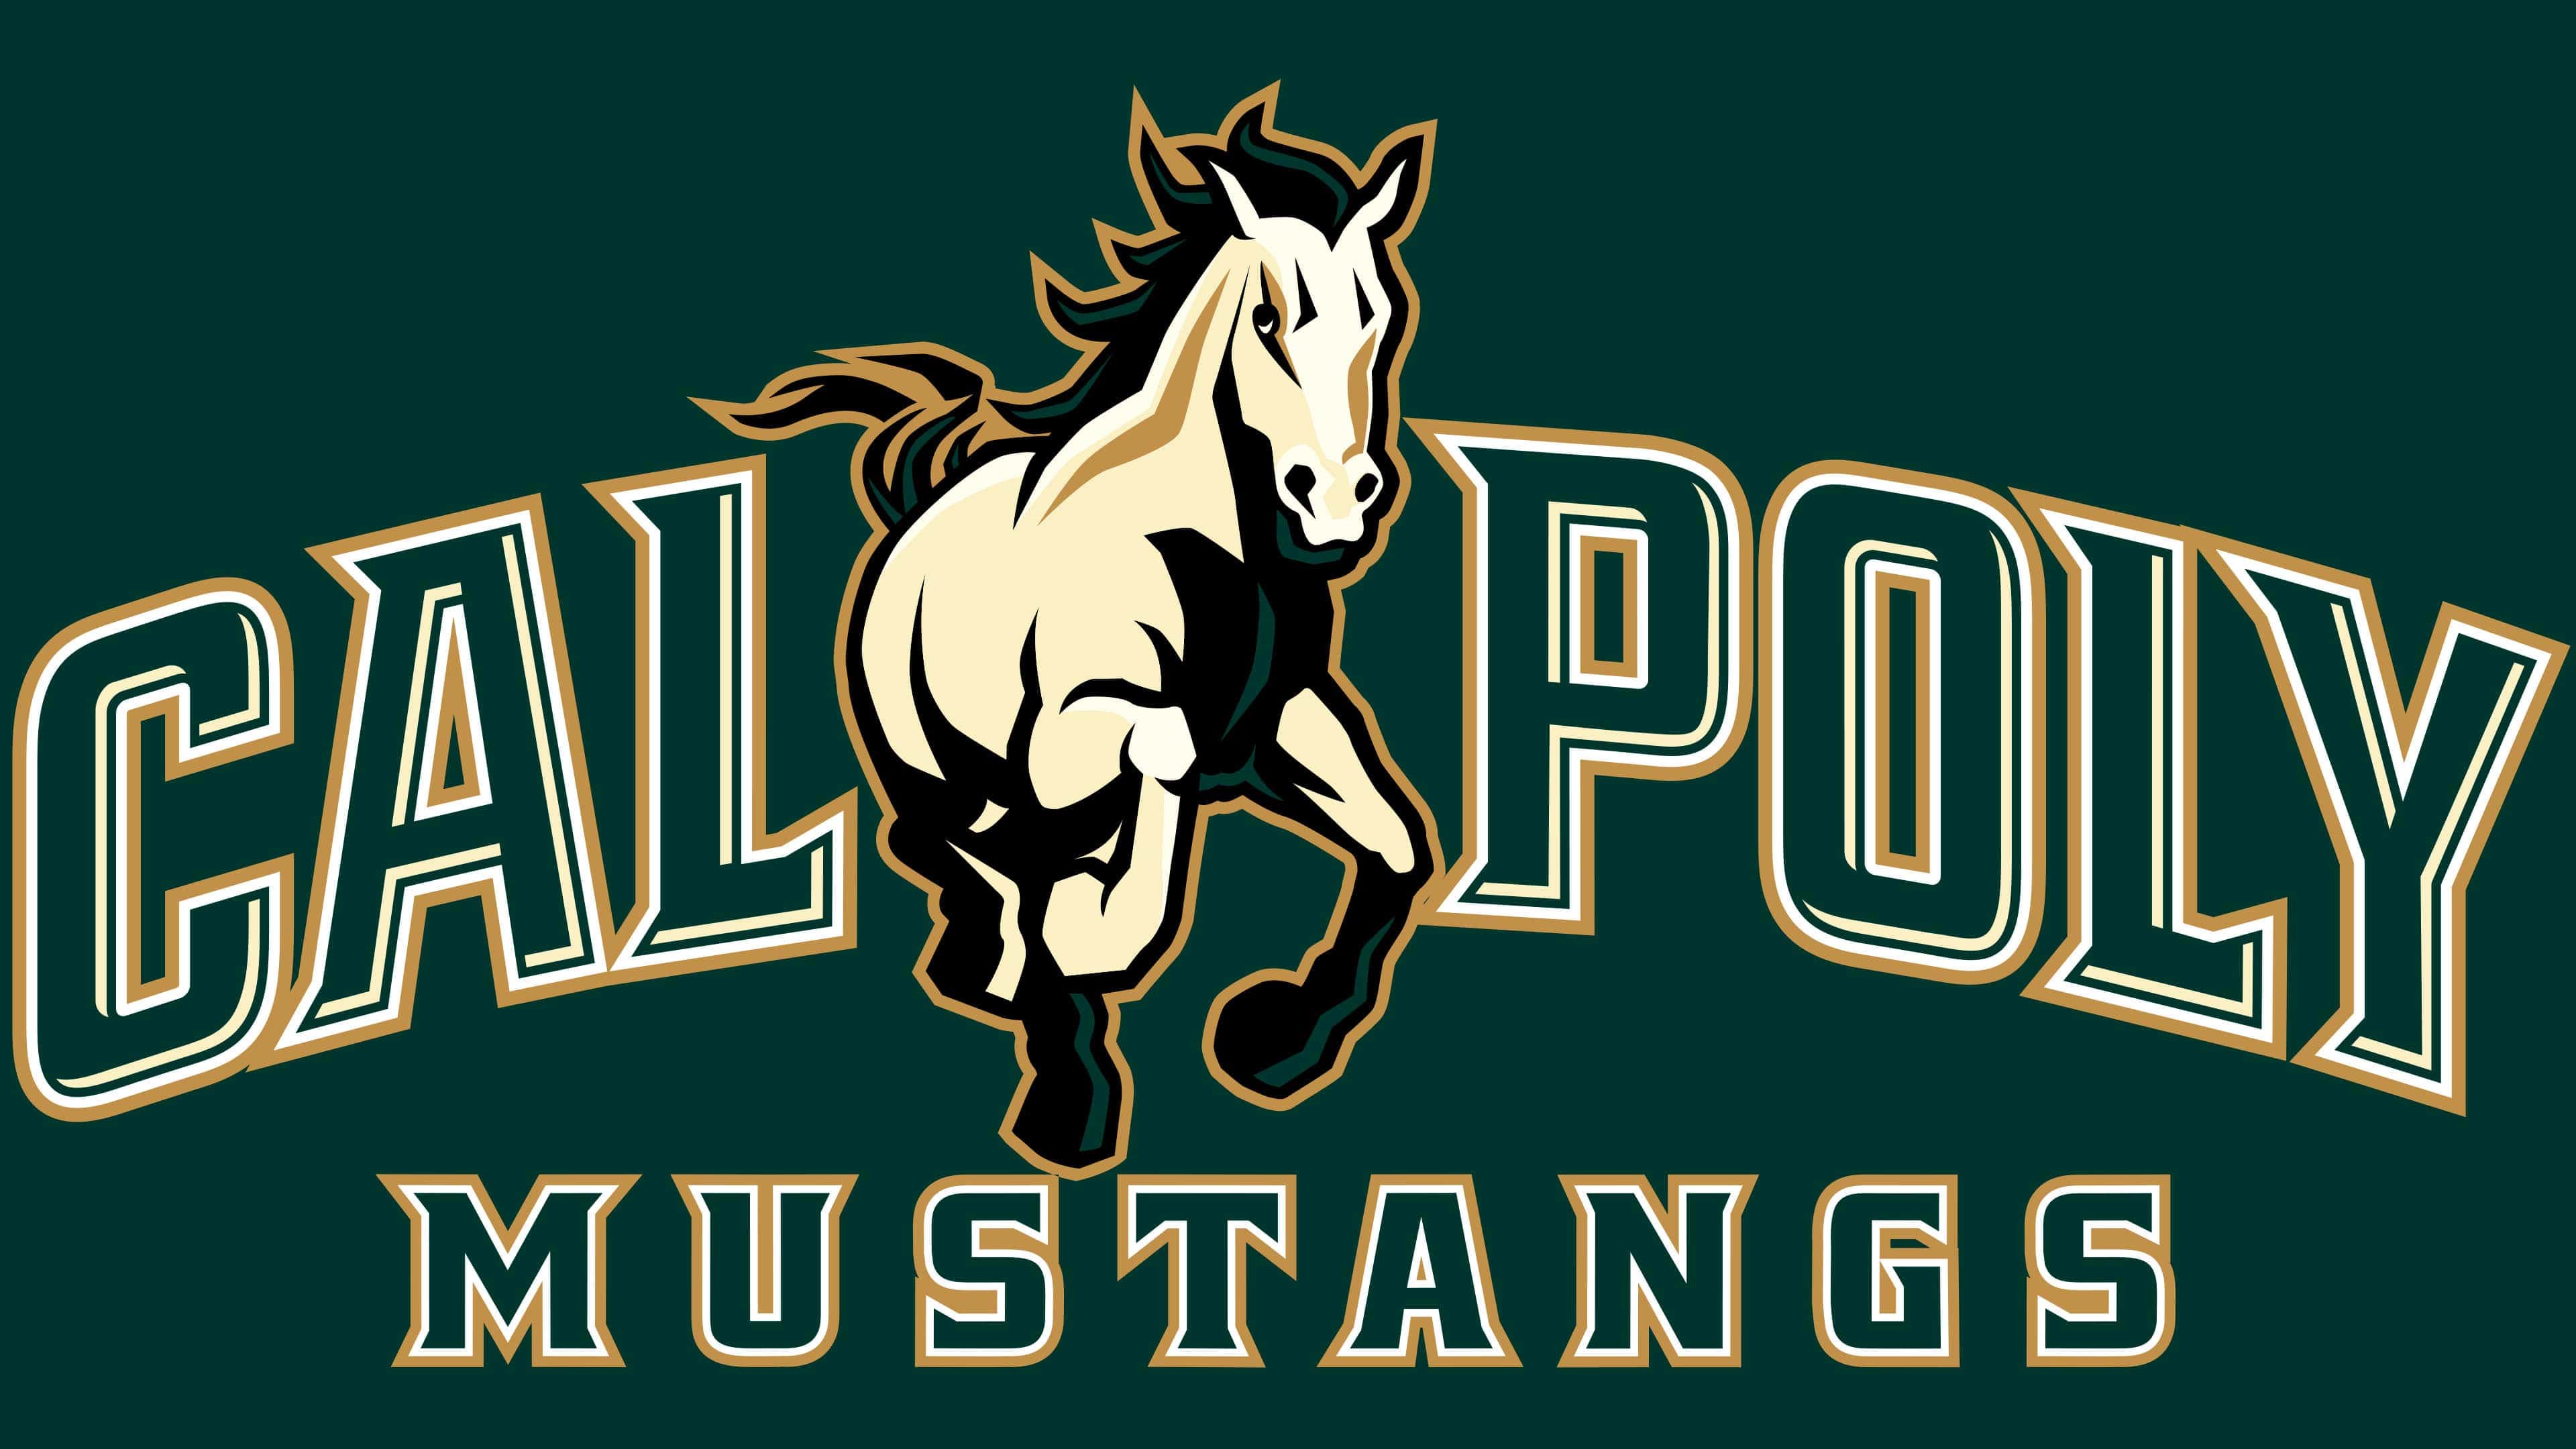 Cal Poly Mustangs Logo, PNG, Symbol, History, Meaning